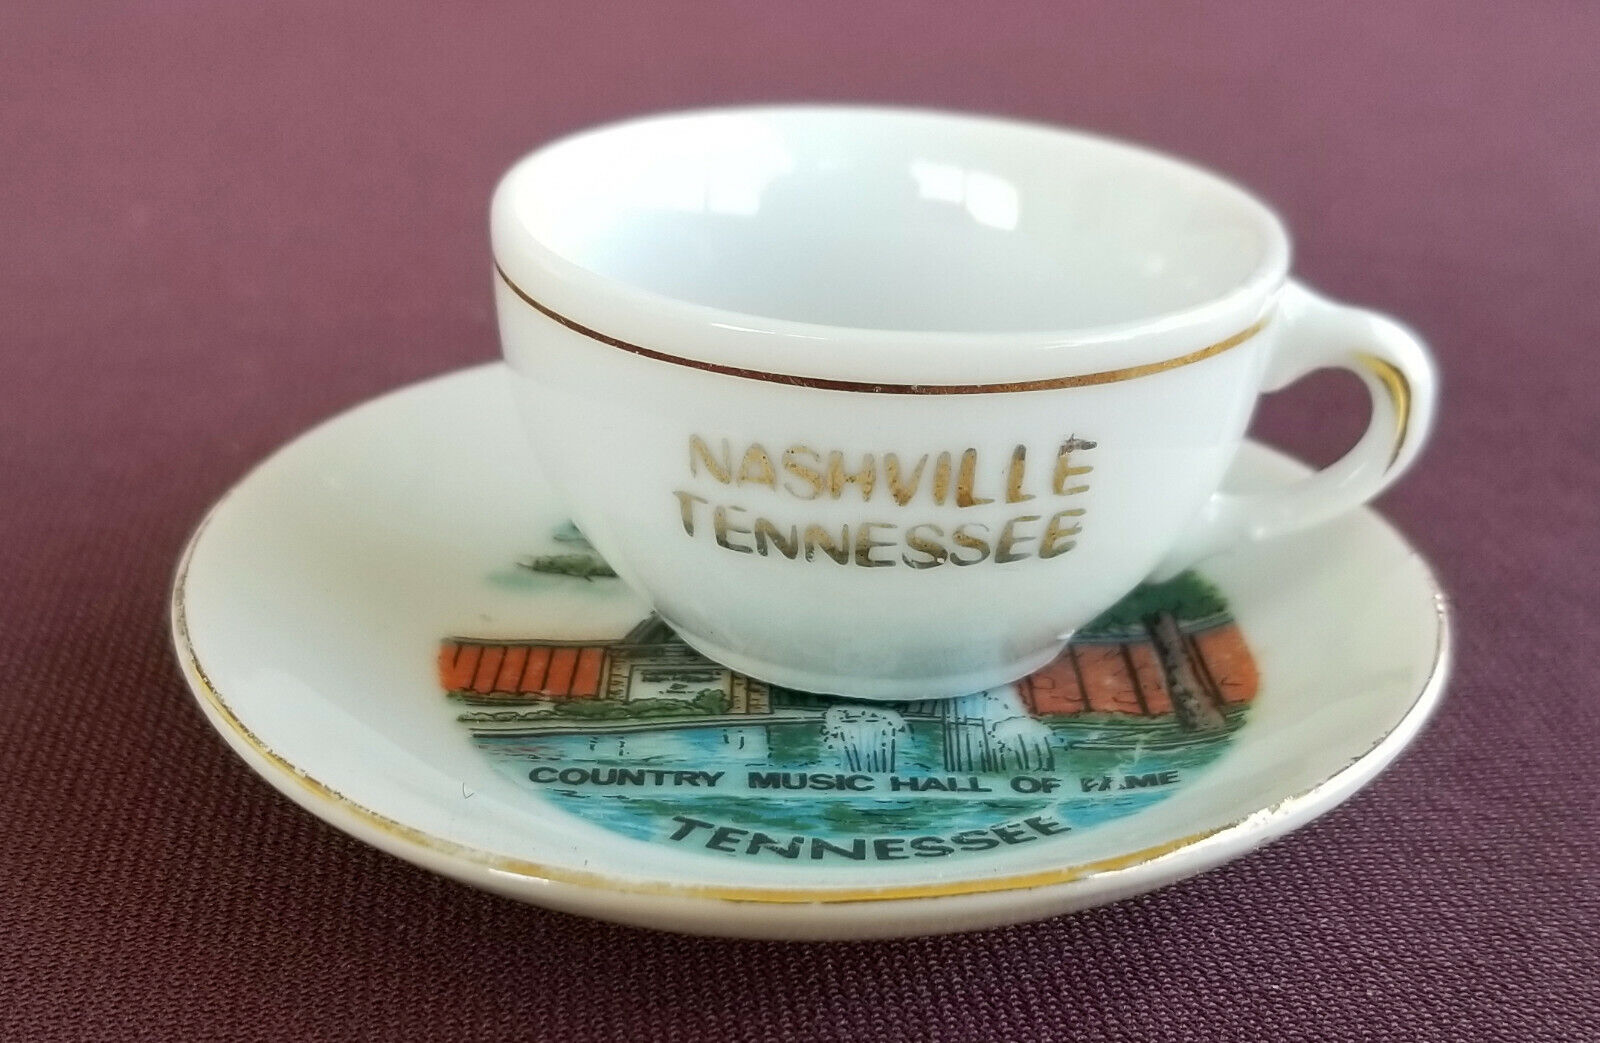 NASHVILLE TENNESSEE Vintage 1960's Souvenir CUP & SAUCER Country Music Hall Fame